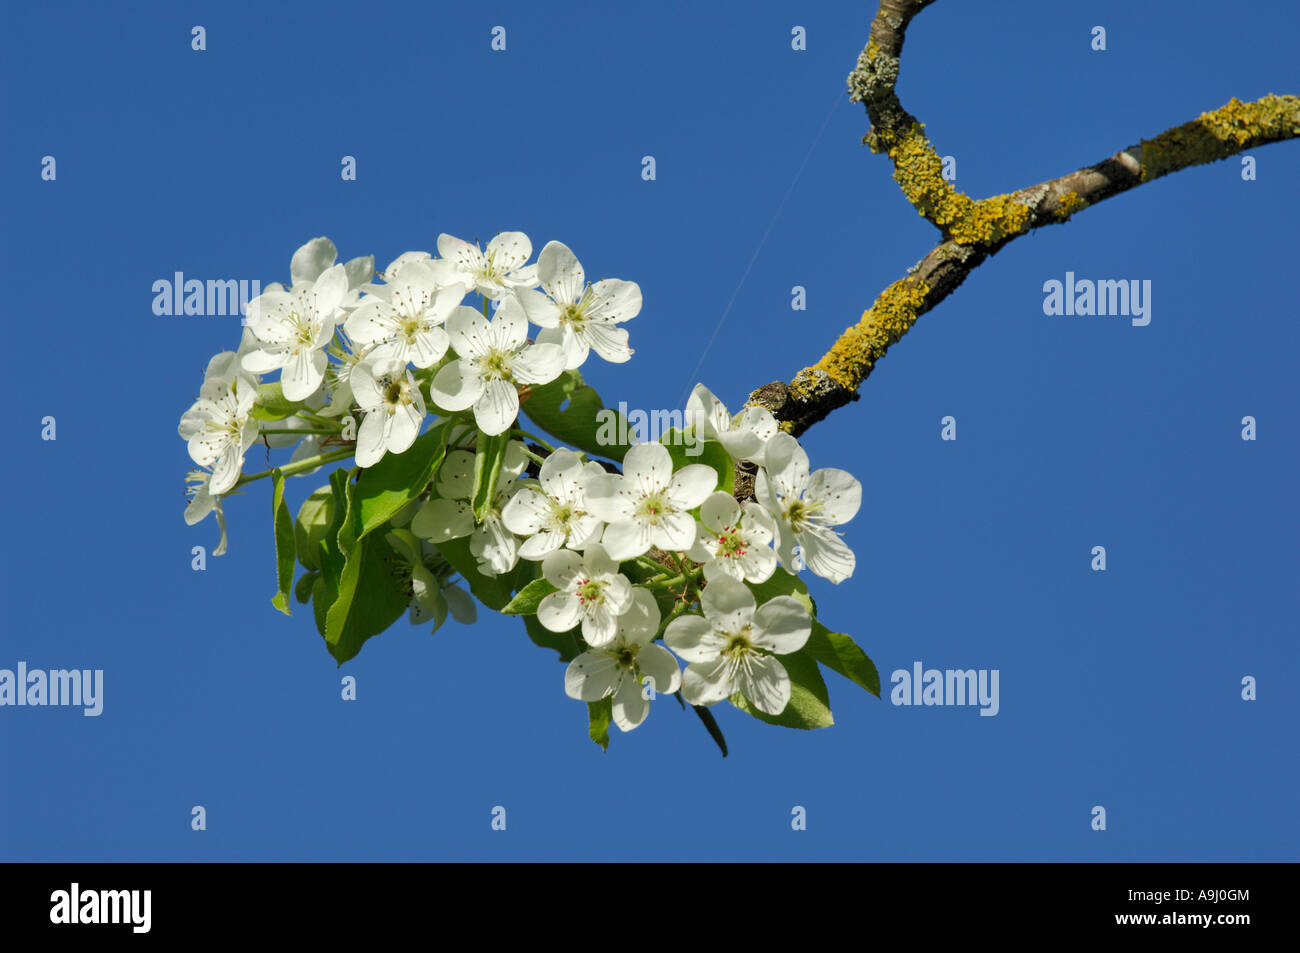 Blossoms of wild pear tree (Pyrus pyraster) Stock Photo